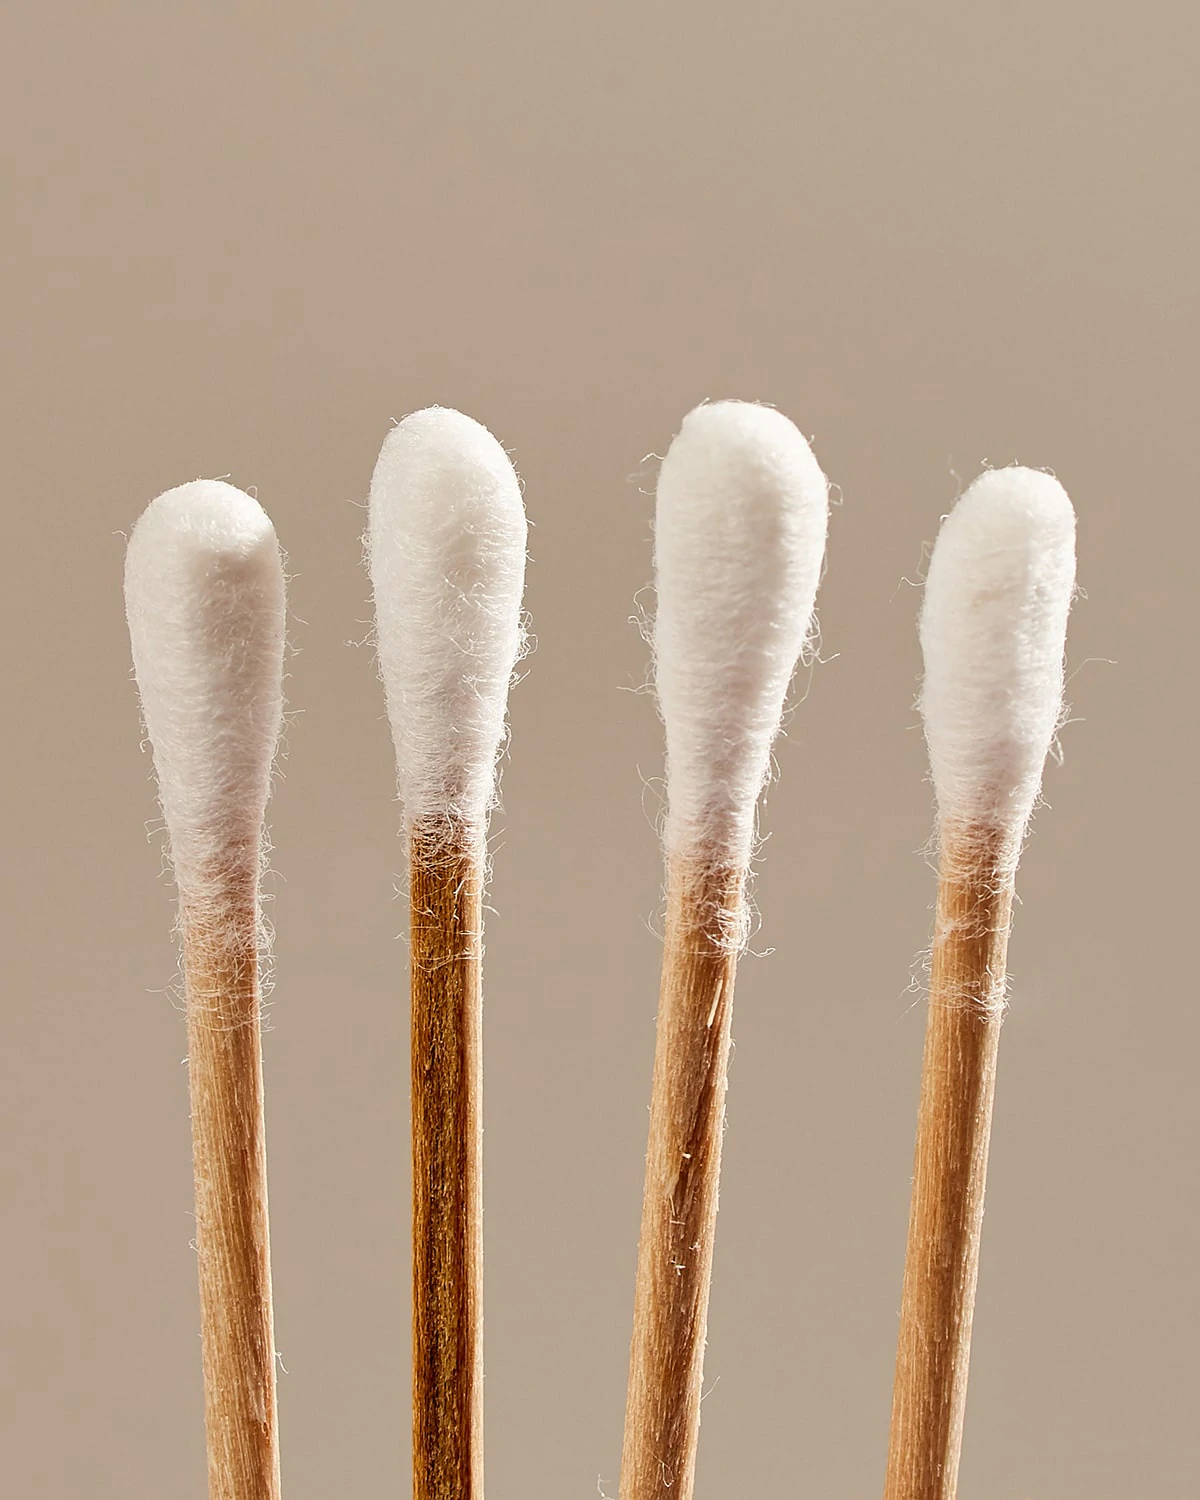 Product: The Gaea Store Bamboo Cotton Swabs (Pack of 2)